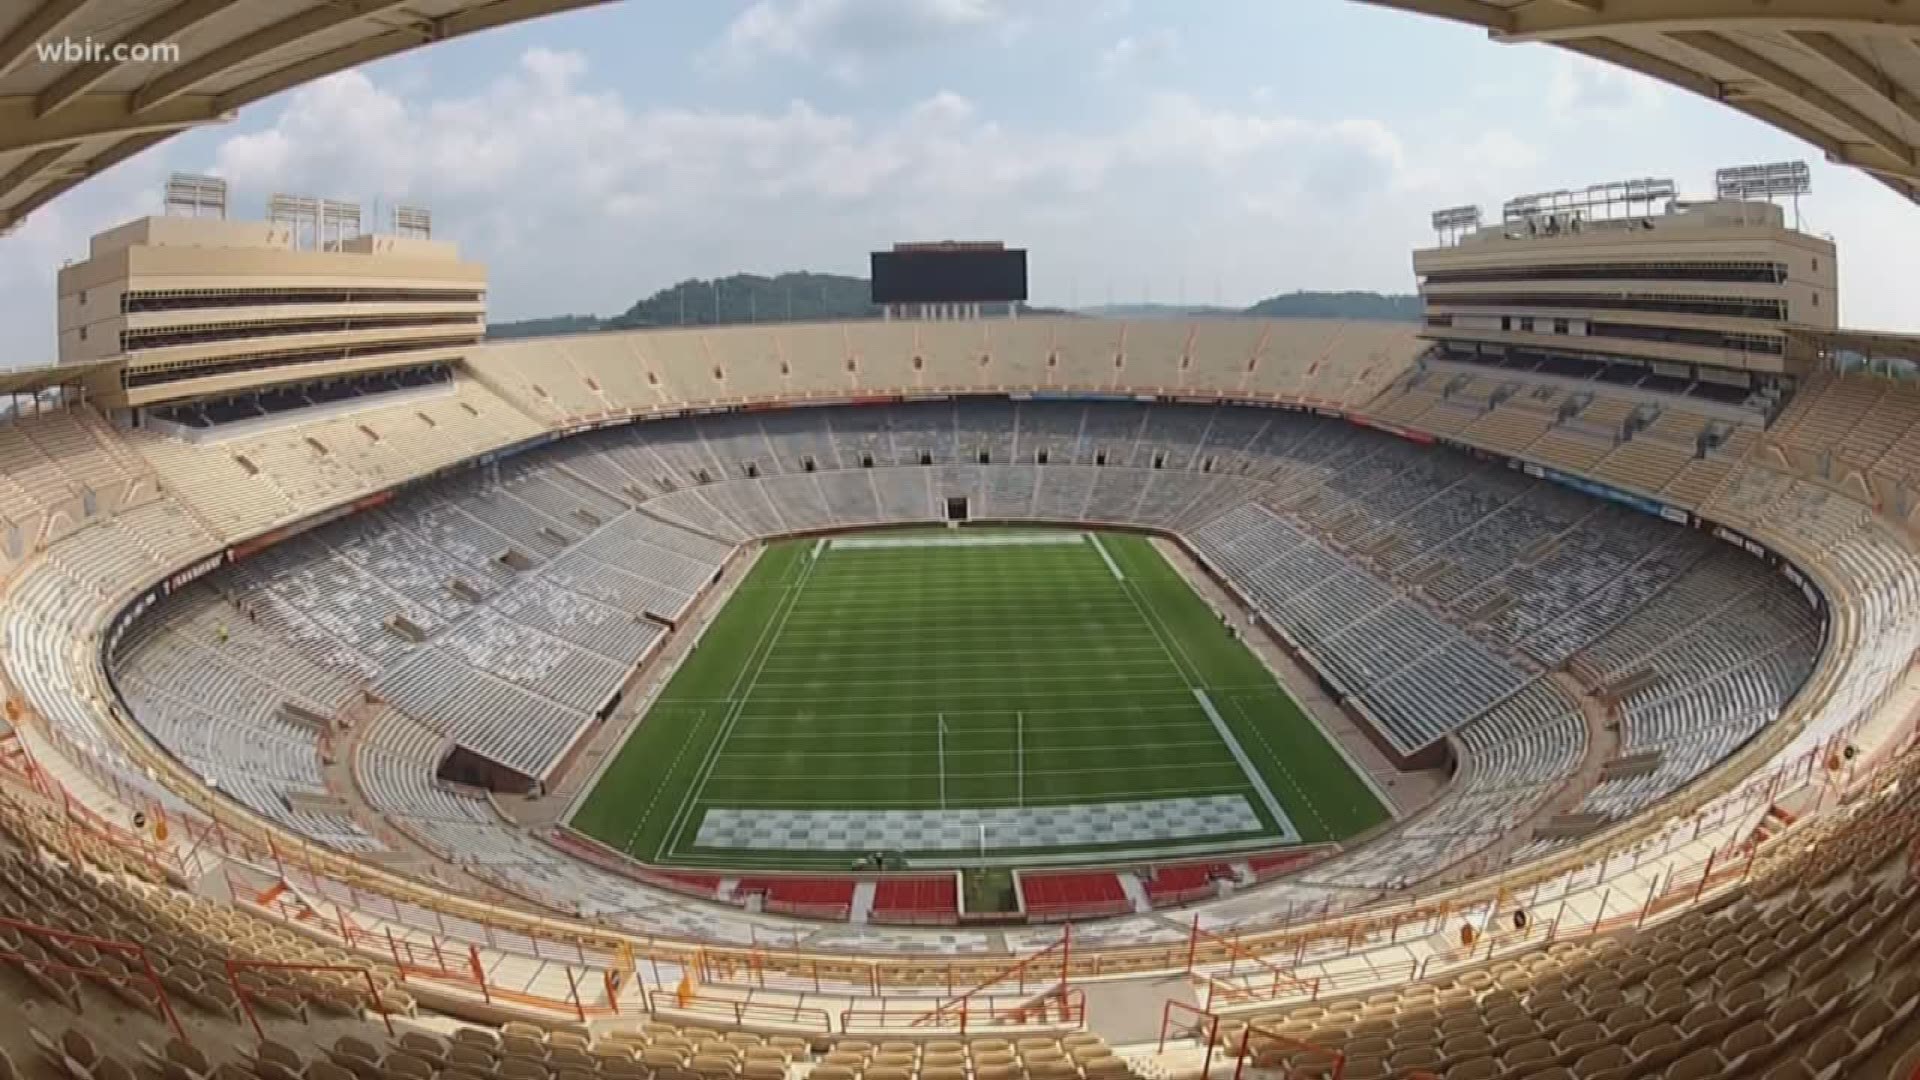 The Knoxville Beer Board just passed UT's plans to sell alcohol at Neyland Stadium, Thompson-Boling  and Regal Soccer Stadium.